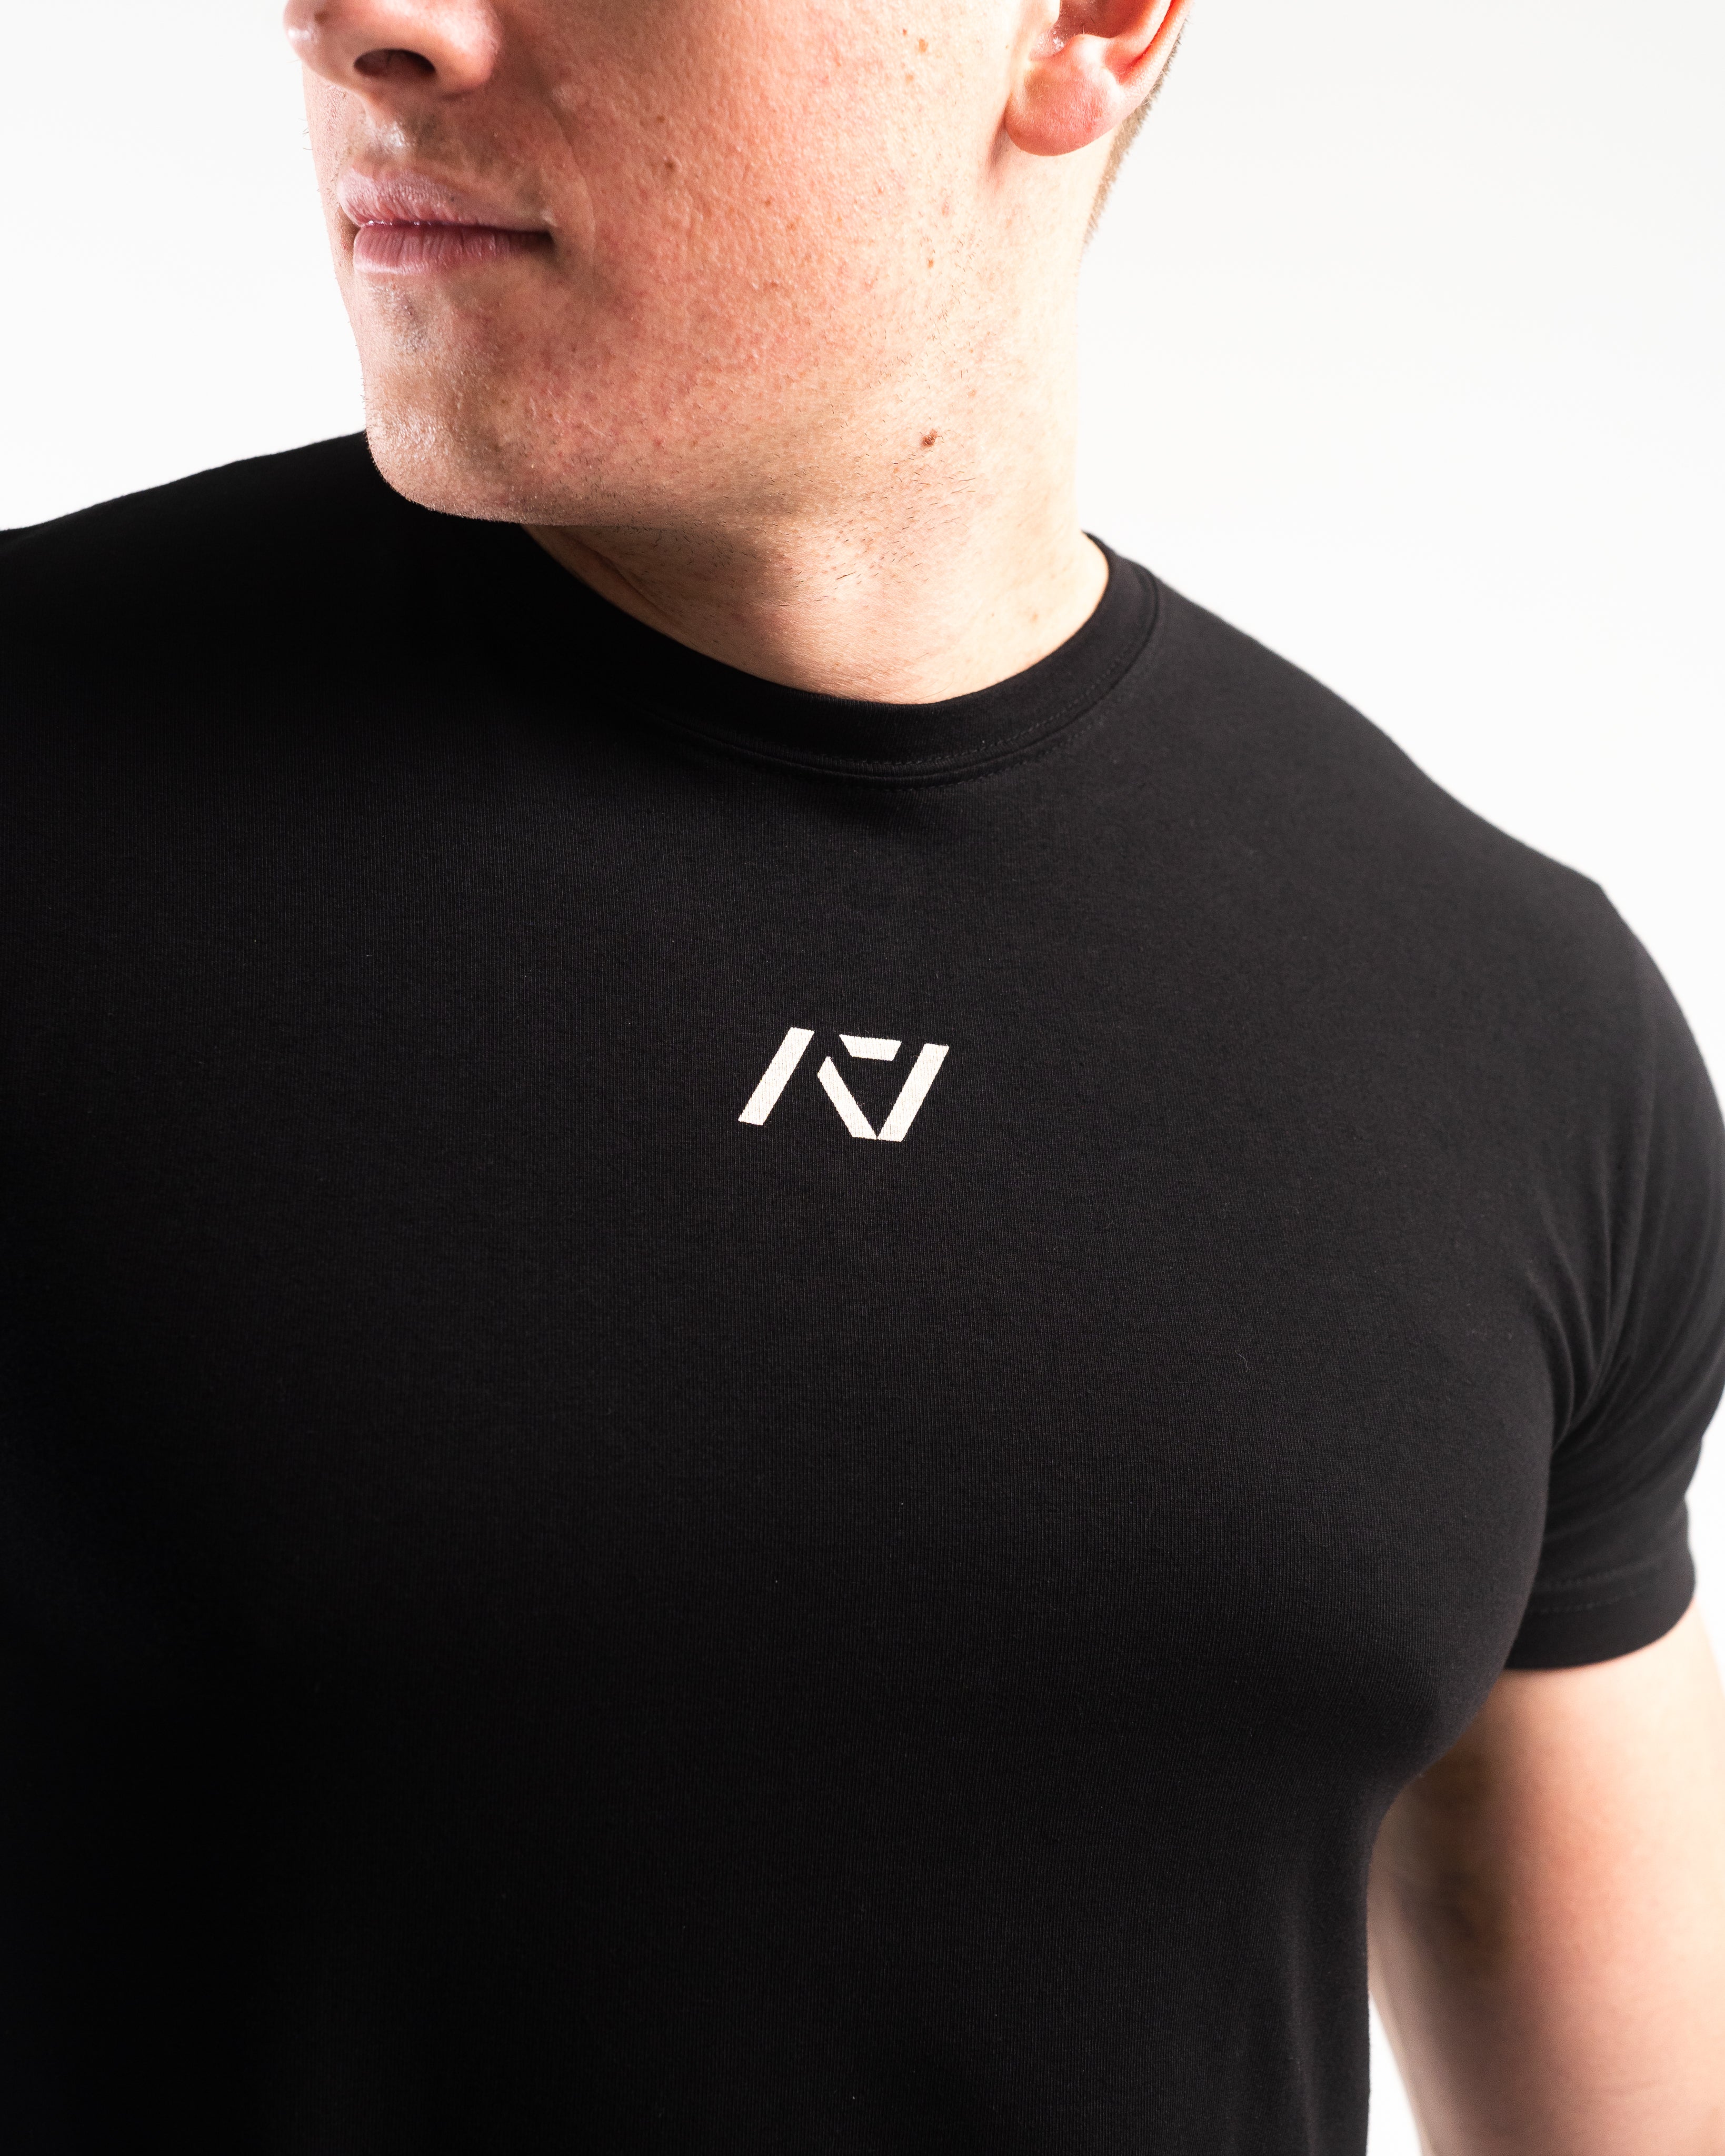 Stealth is our classic black on black shirt design. With the Stealth shirt you can be noticed, yet still, be able to be subtle. With the Stealth Bar Grip Shirt you can be noticed, yet still, be able to be subtle. The A7 silicone bar grip helps with slippery commercial benches and bars and anchors the barbell to your back. All A7 Powerlifting Equipment shipping to UK, Norway, Switzerland and Iceland.